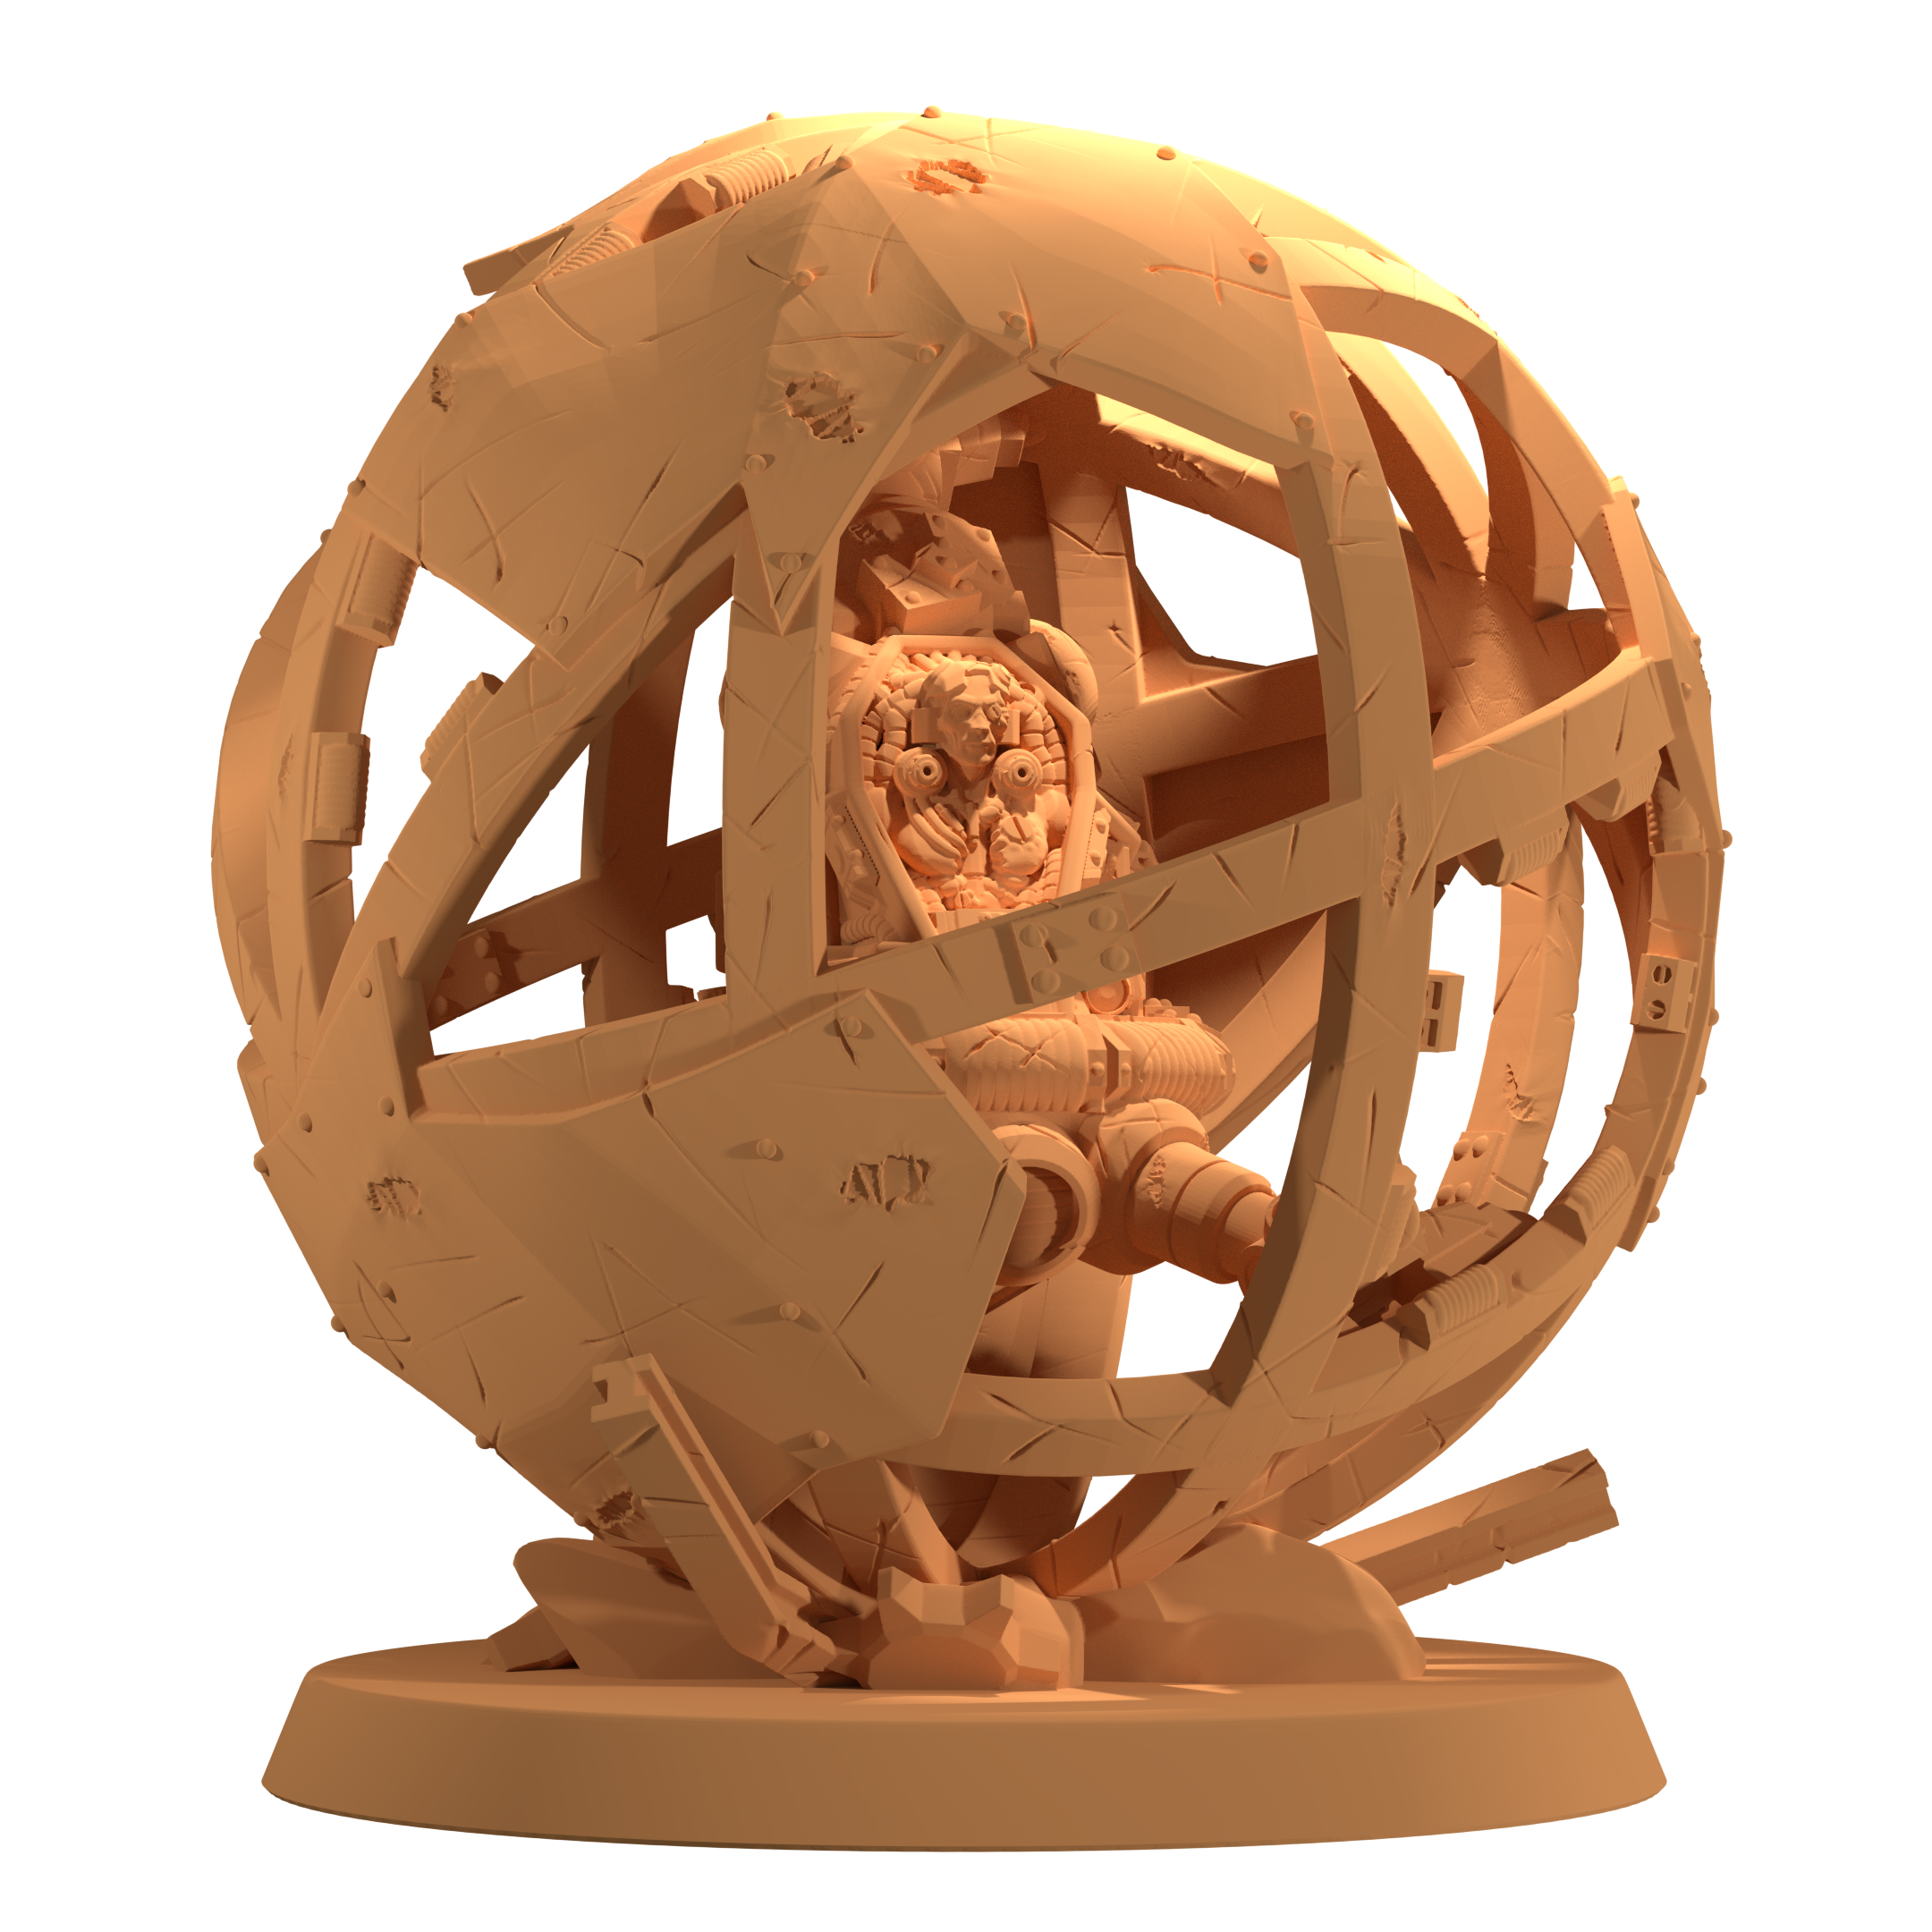 The Third Law: The ‘Shocksphere’ Preview Sculpt